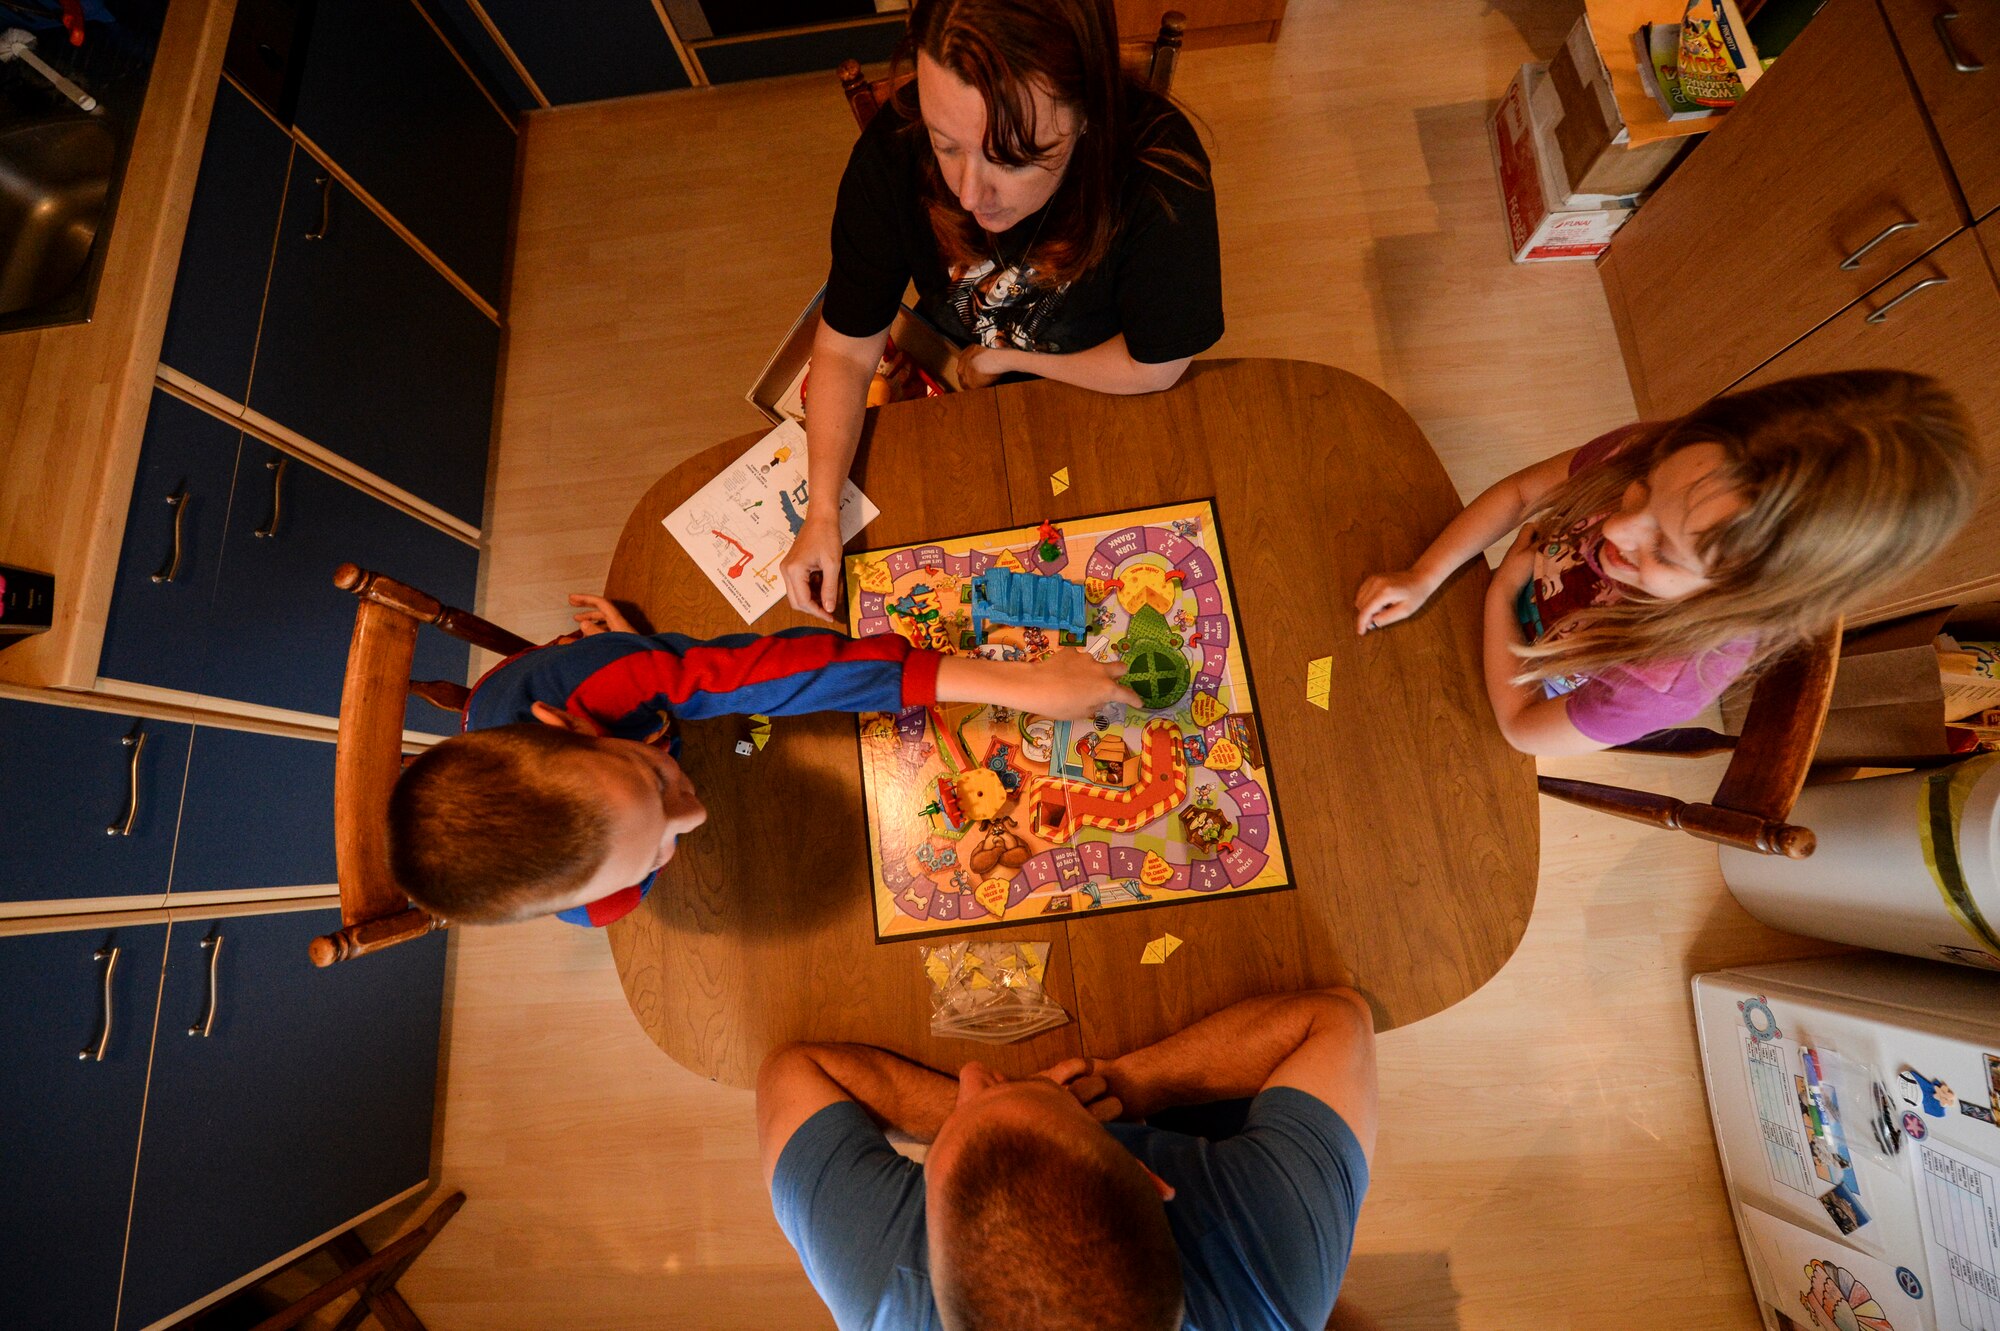 U.S. Air Force Master Sgt. Donald Stichter, 52nd Equipment Maintenance Squadron NCO in charge of munitions inspection from Lakewood, Colo., plays a board game with his family May 5, 2014 at his house in Malbergwelch, Germany. Stichter credits his family’s love and support to his success while training and competing in his first marathon. (U.S. Air Force photo by Senior Airman Rusty Frank/Released)